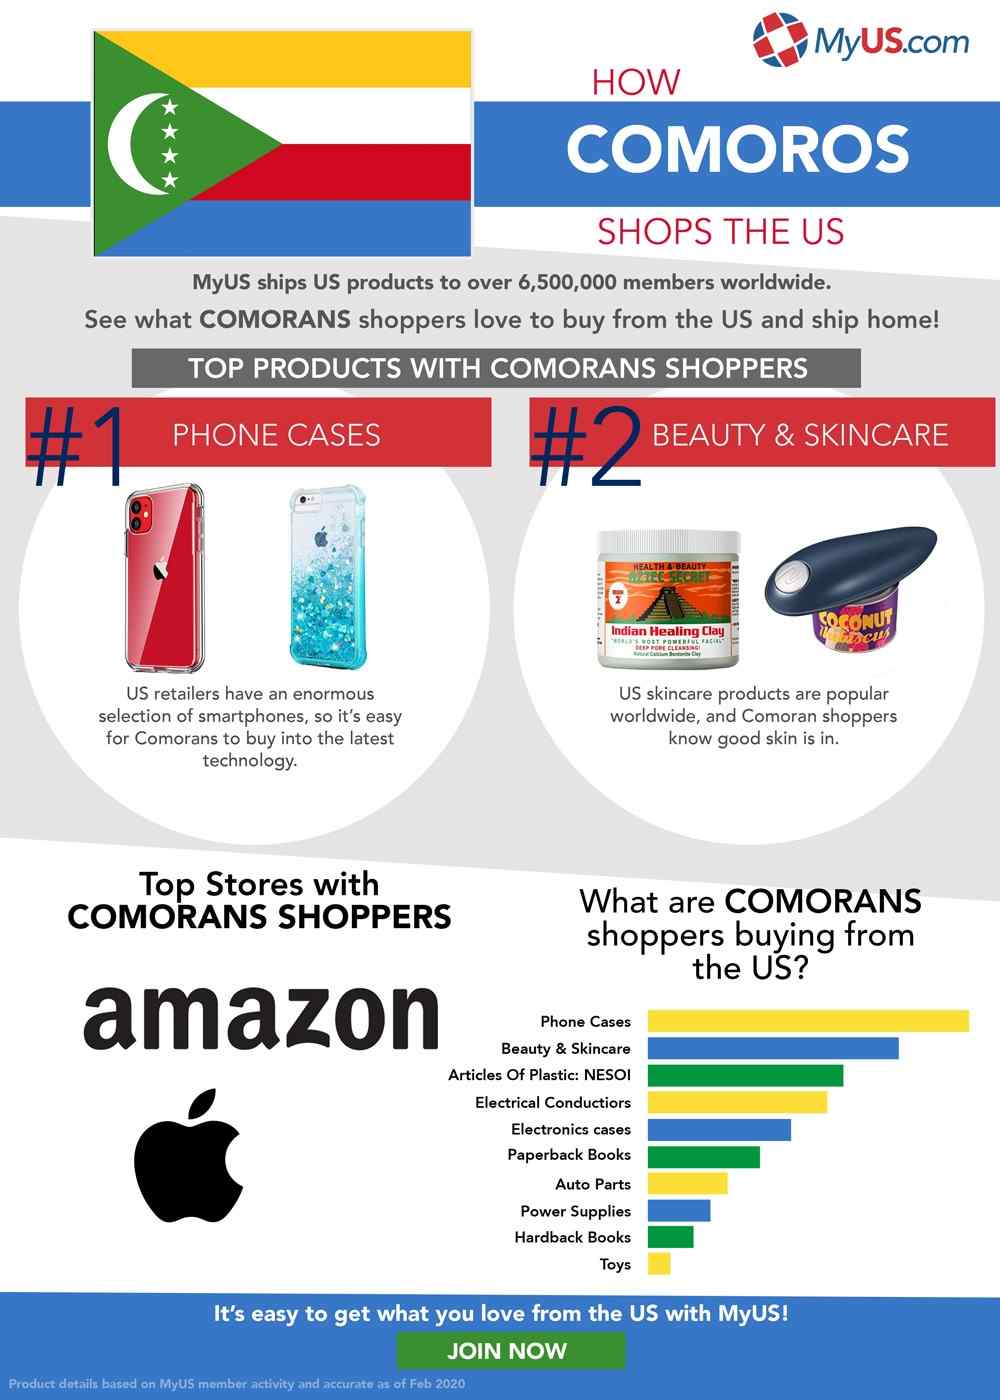 How Comoros Shops the US Infographic